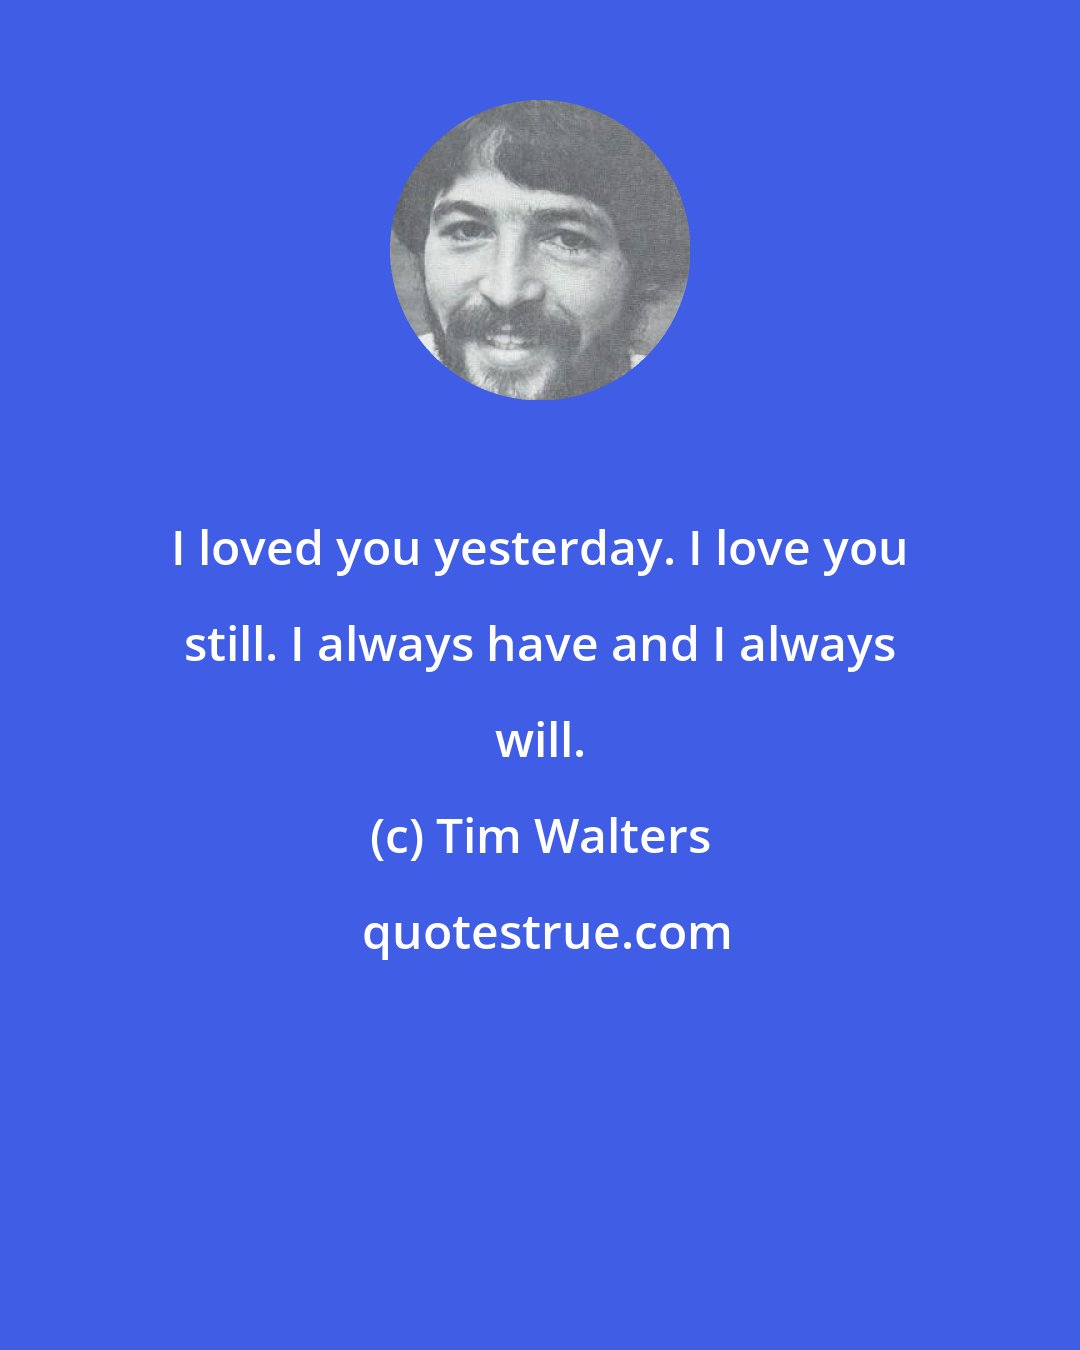 Tim Walters: I loved you yesterday. I love you still. I always have and I always will.